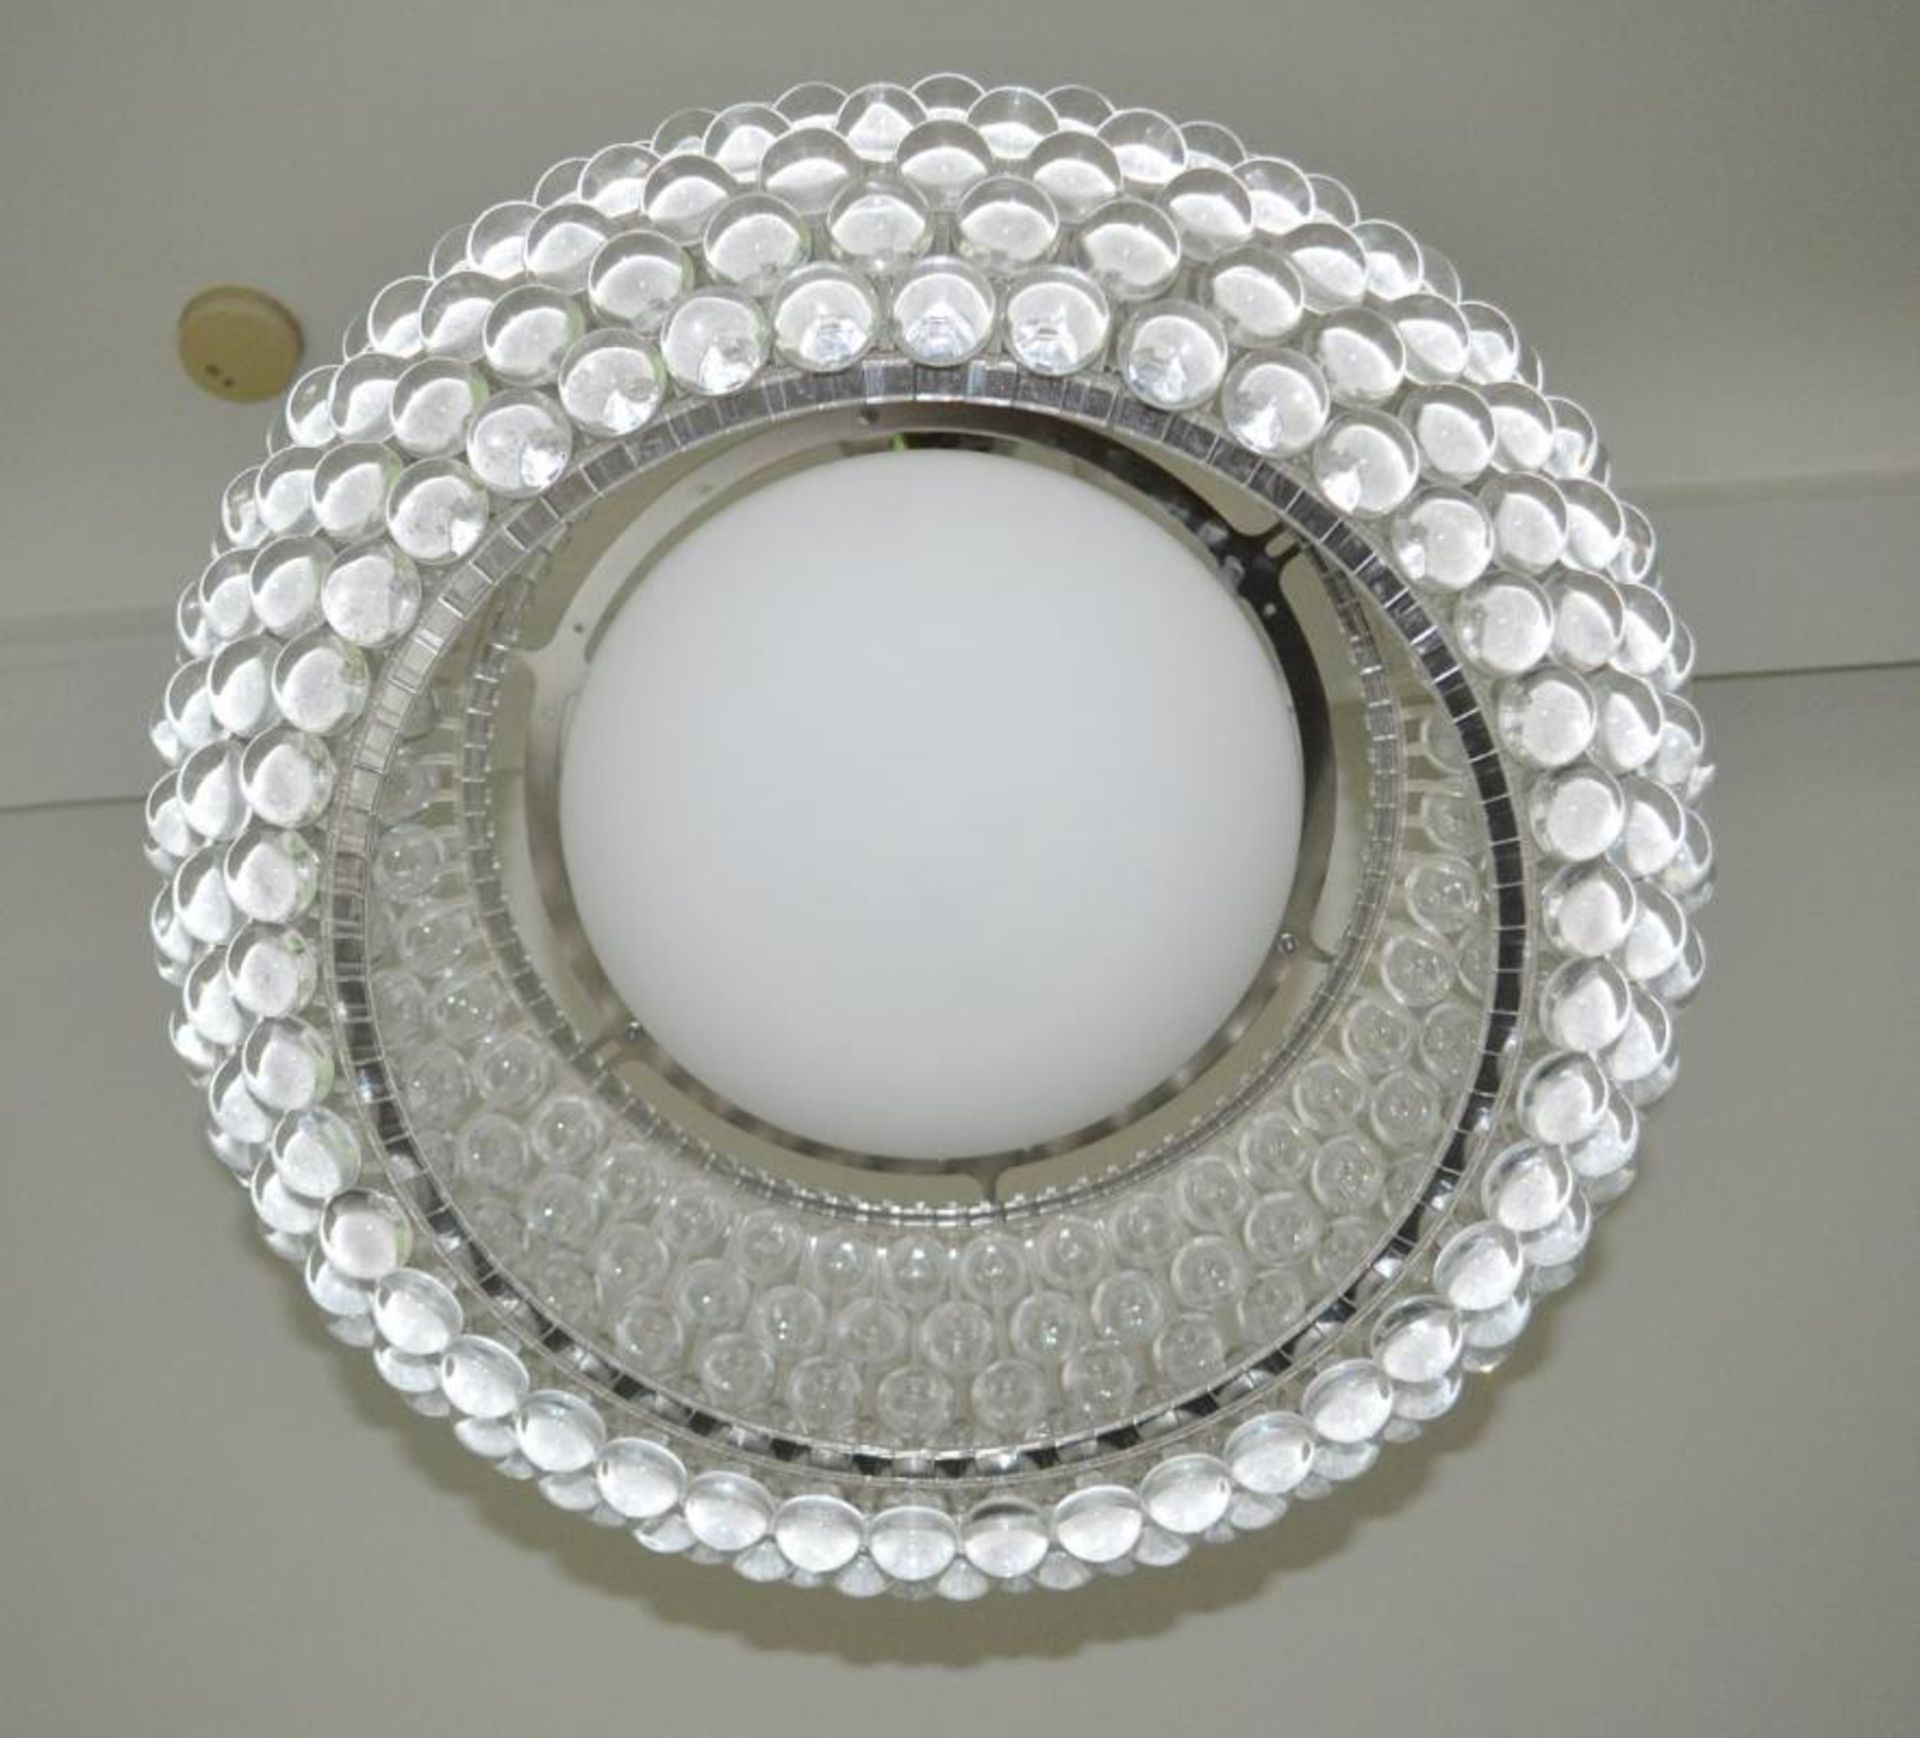 Clear Glass Bubble Light Set - CL439 - Location: Ilkey LS29 - Used In Good Condition - Image 8 of 8